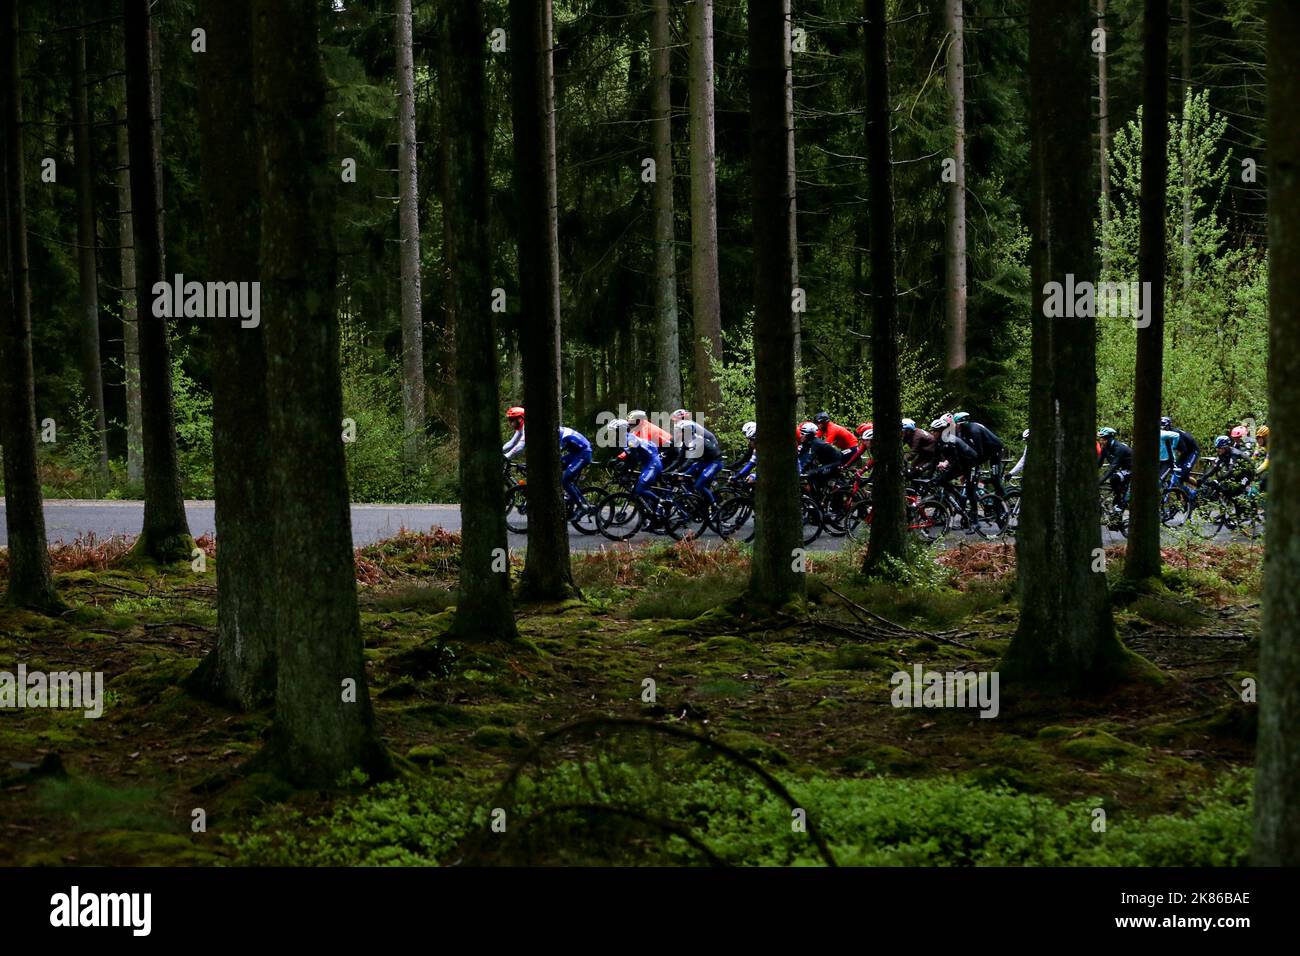 The race makes its way though the thick woods of the Ardennes Stock Photo